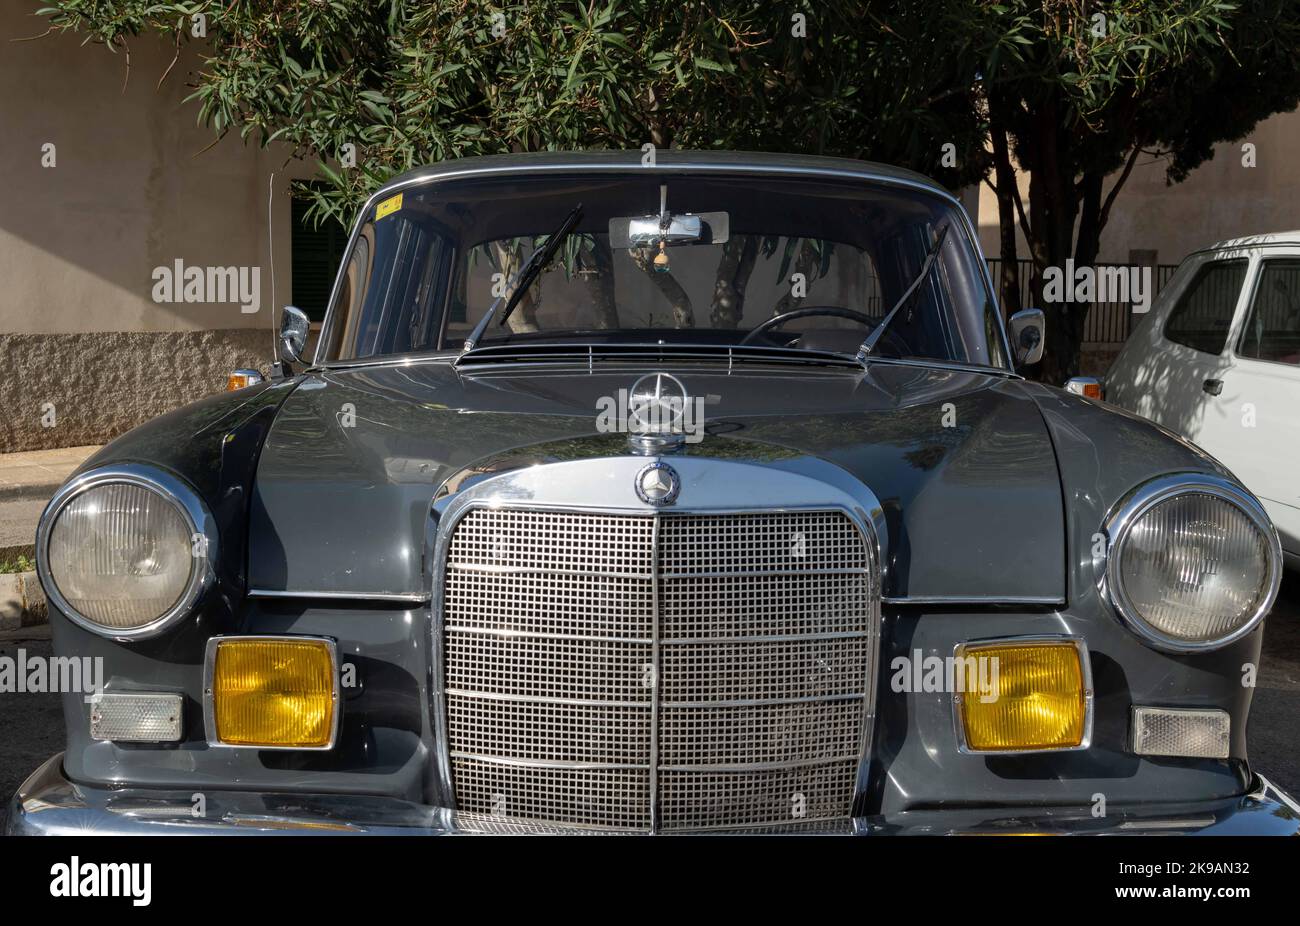 Felanitx, Spain; october 23 2022: Antique dark gray Mercedes automobile, parked on the street at an antique car show. Felanitx, island of Mallorca, Sp Stock Photo